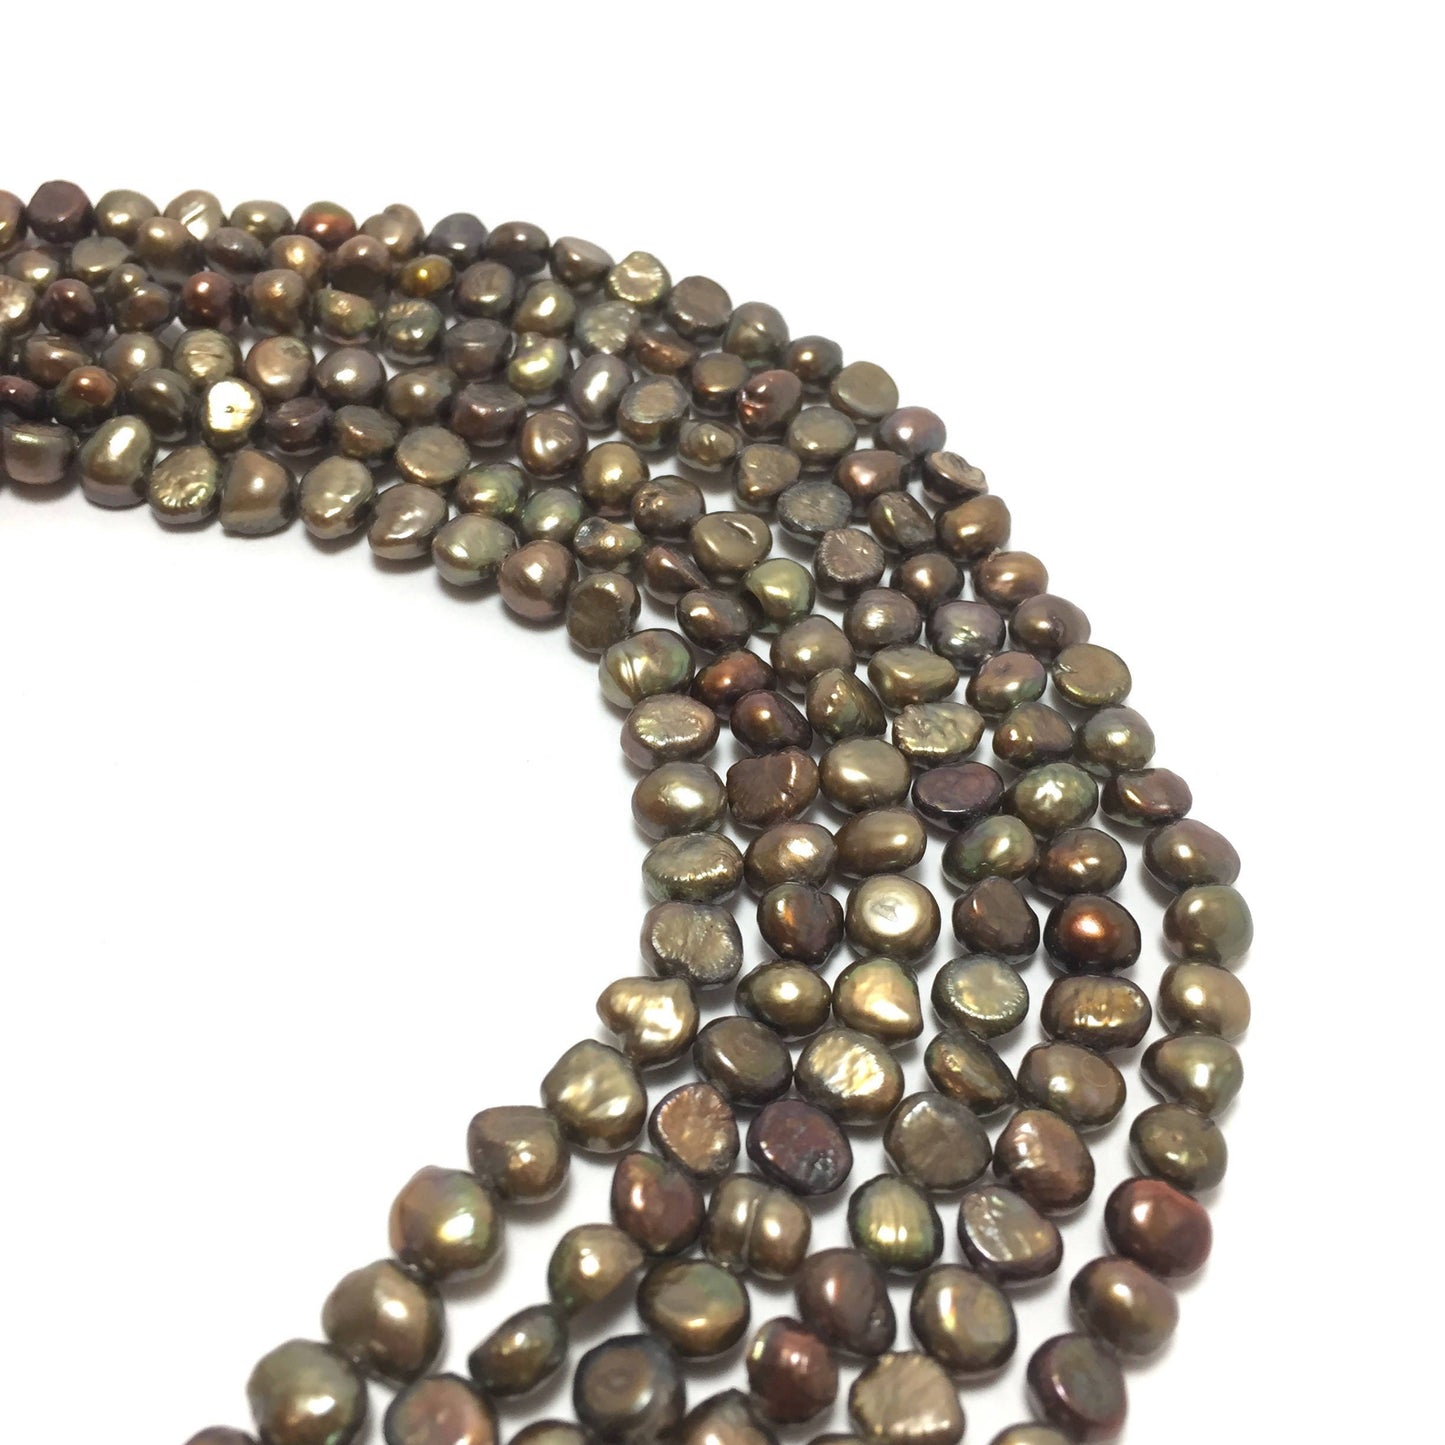 Nugget 6-6.5mm Brown Freshwater Pearls 16 inches, NUG014